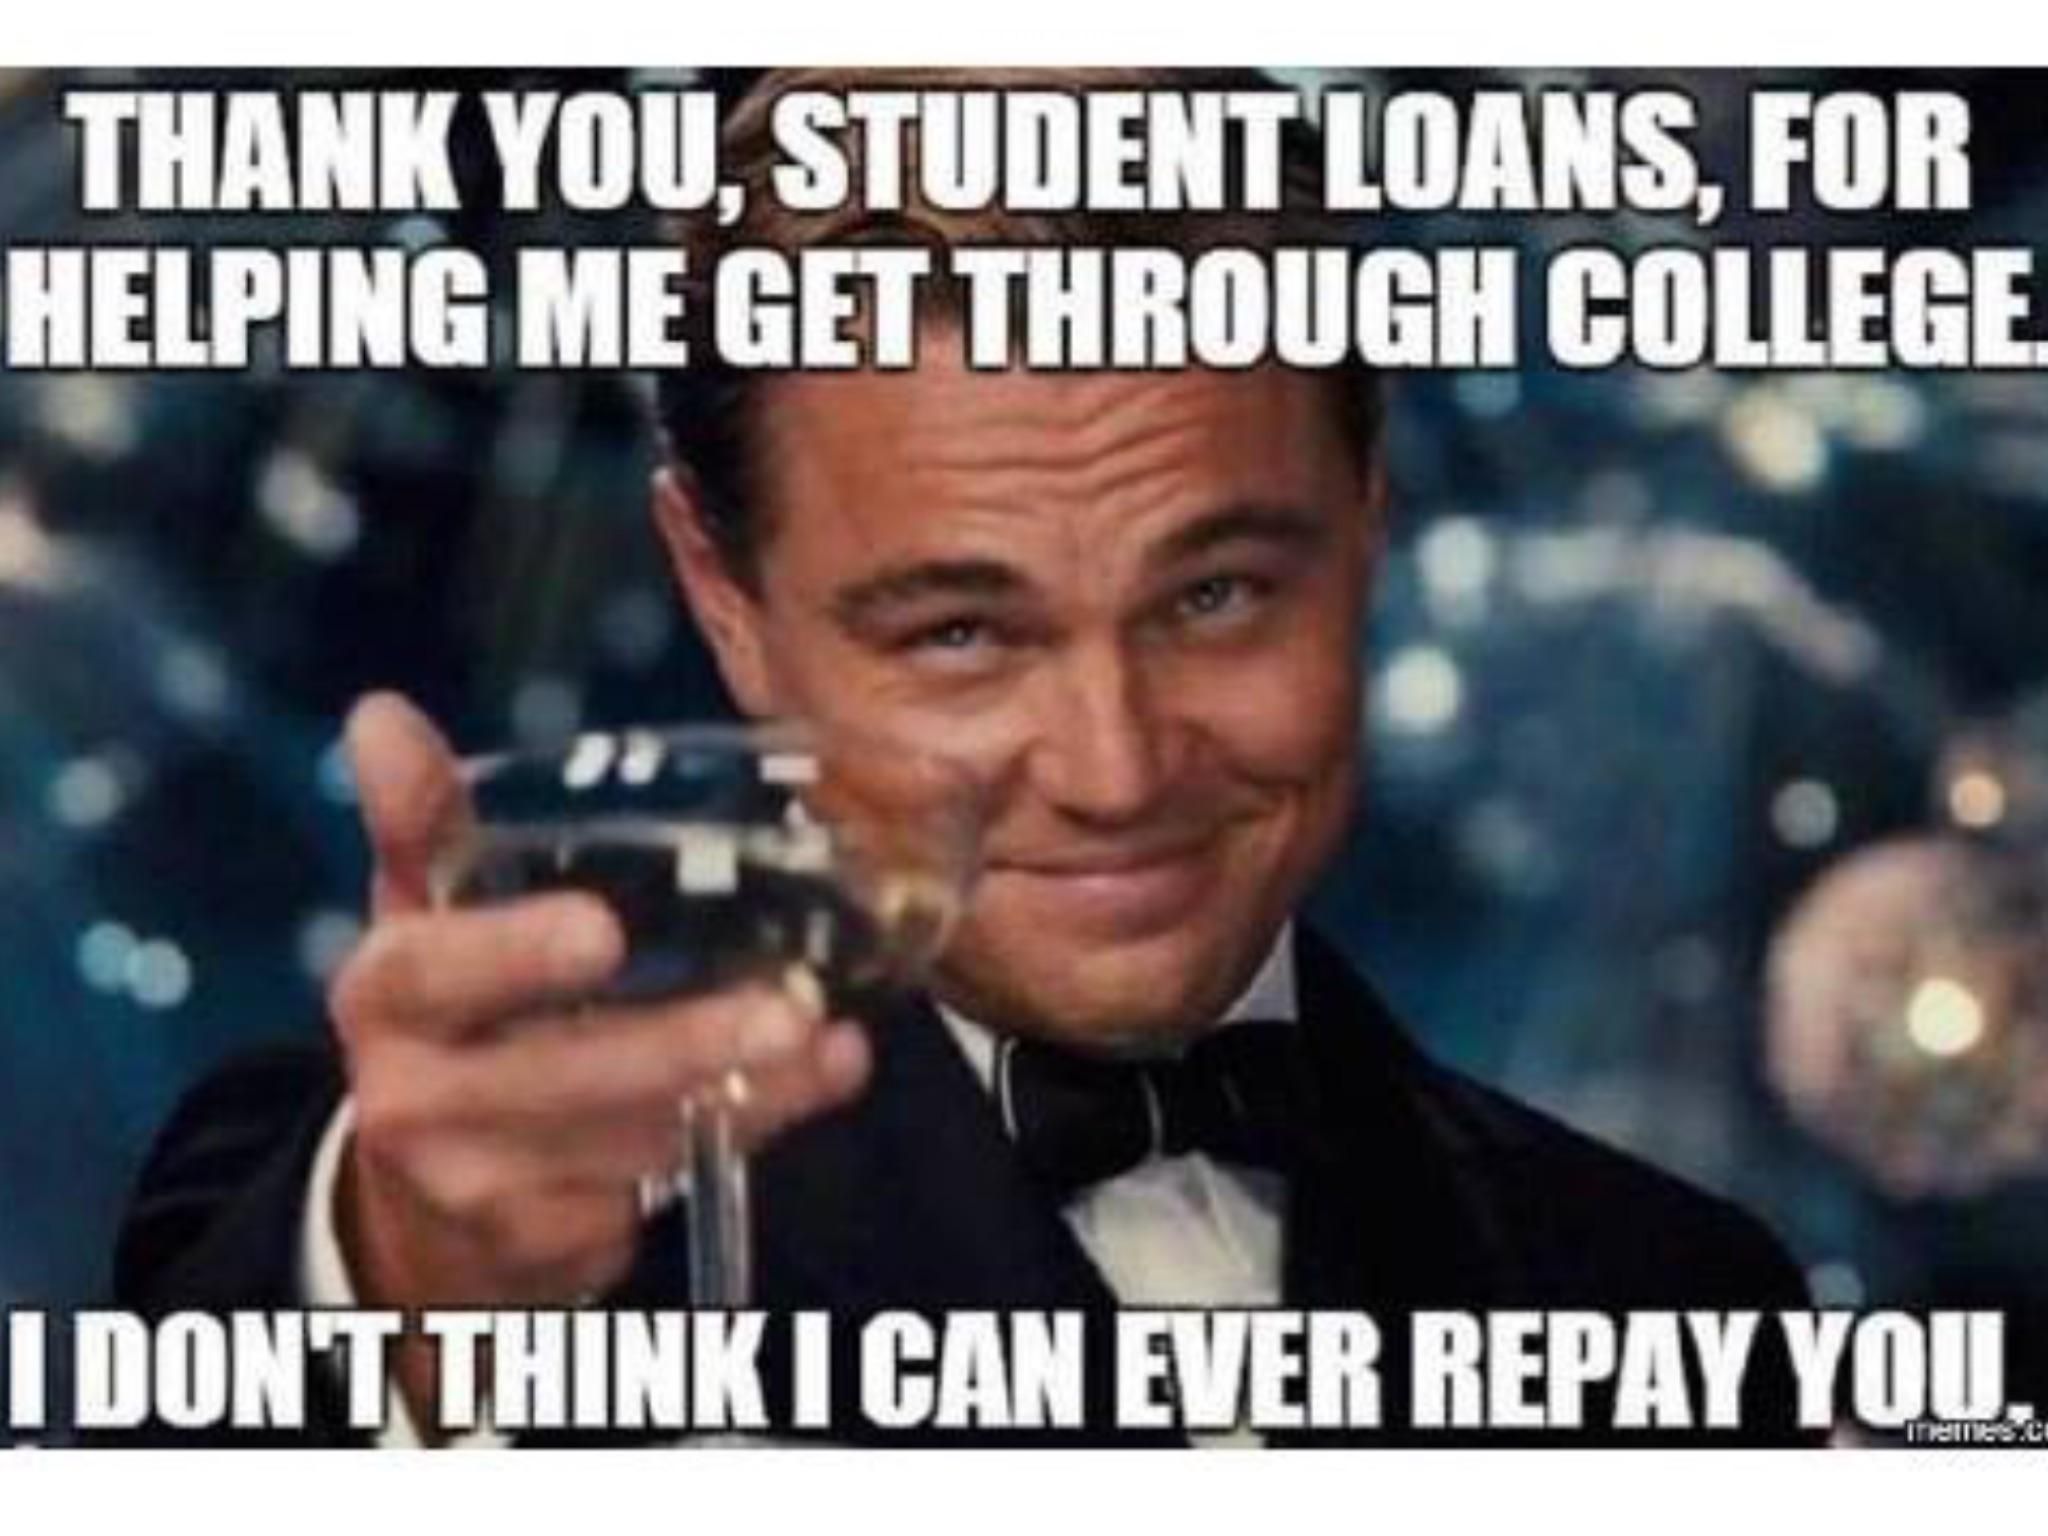 Those student loans